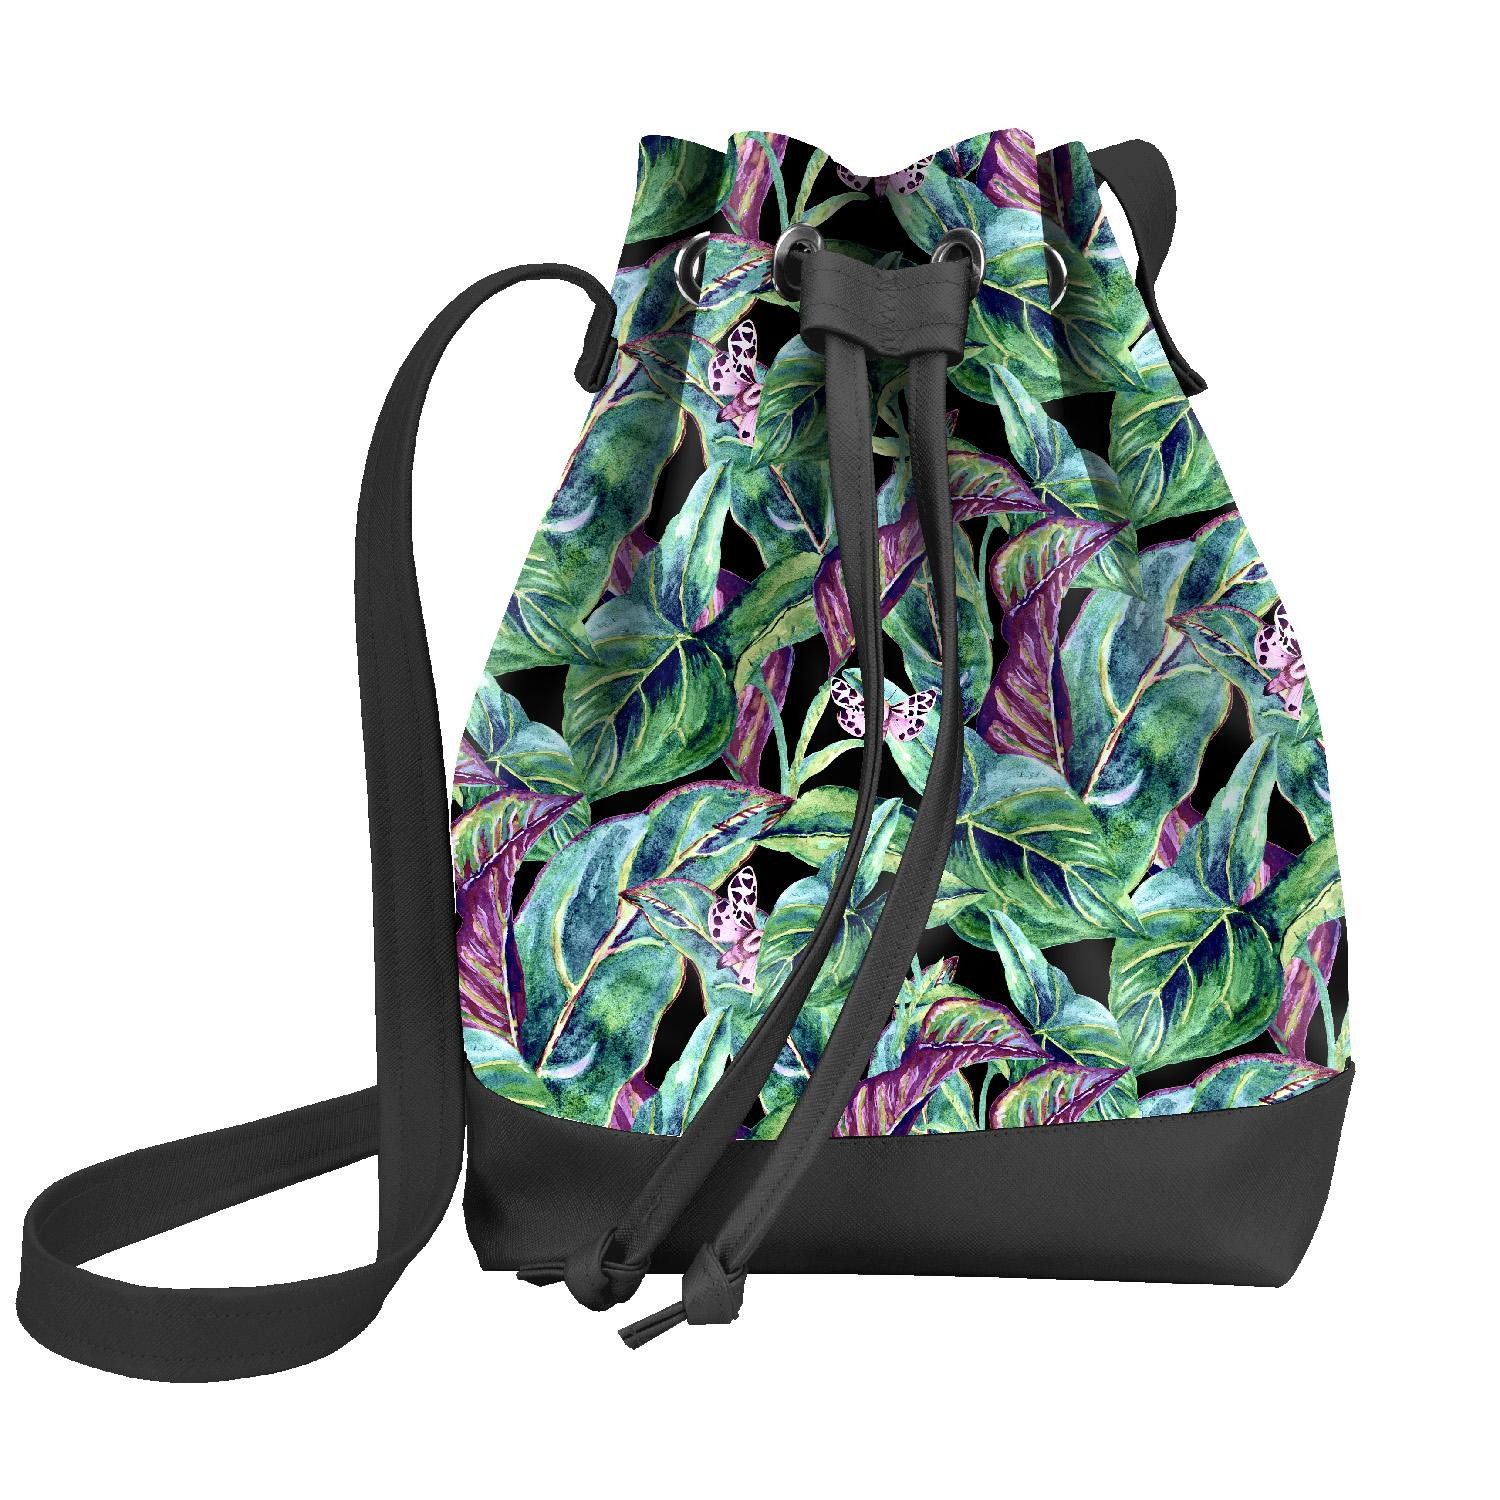 BUCKET BAG - MINI LEAVES AND INSECTS PAT. 1 (TROPICAL NATURE) / black